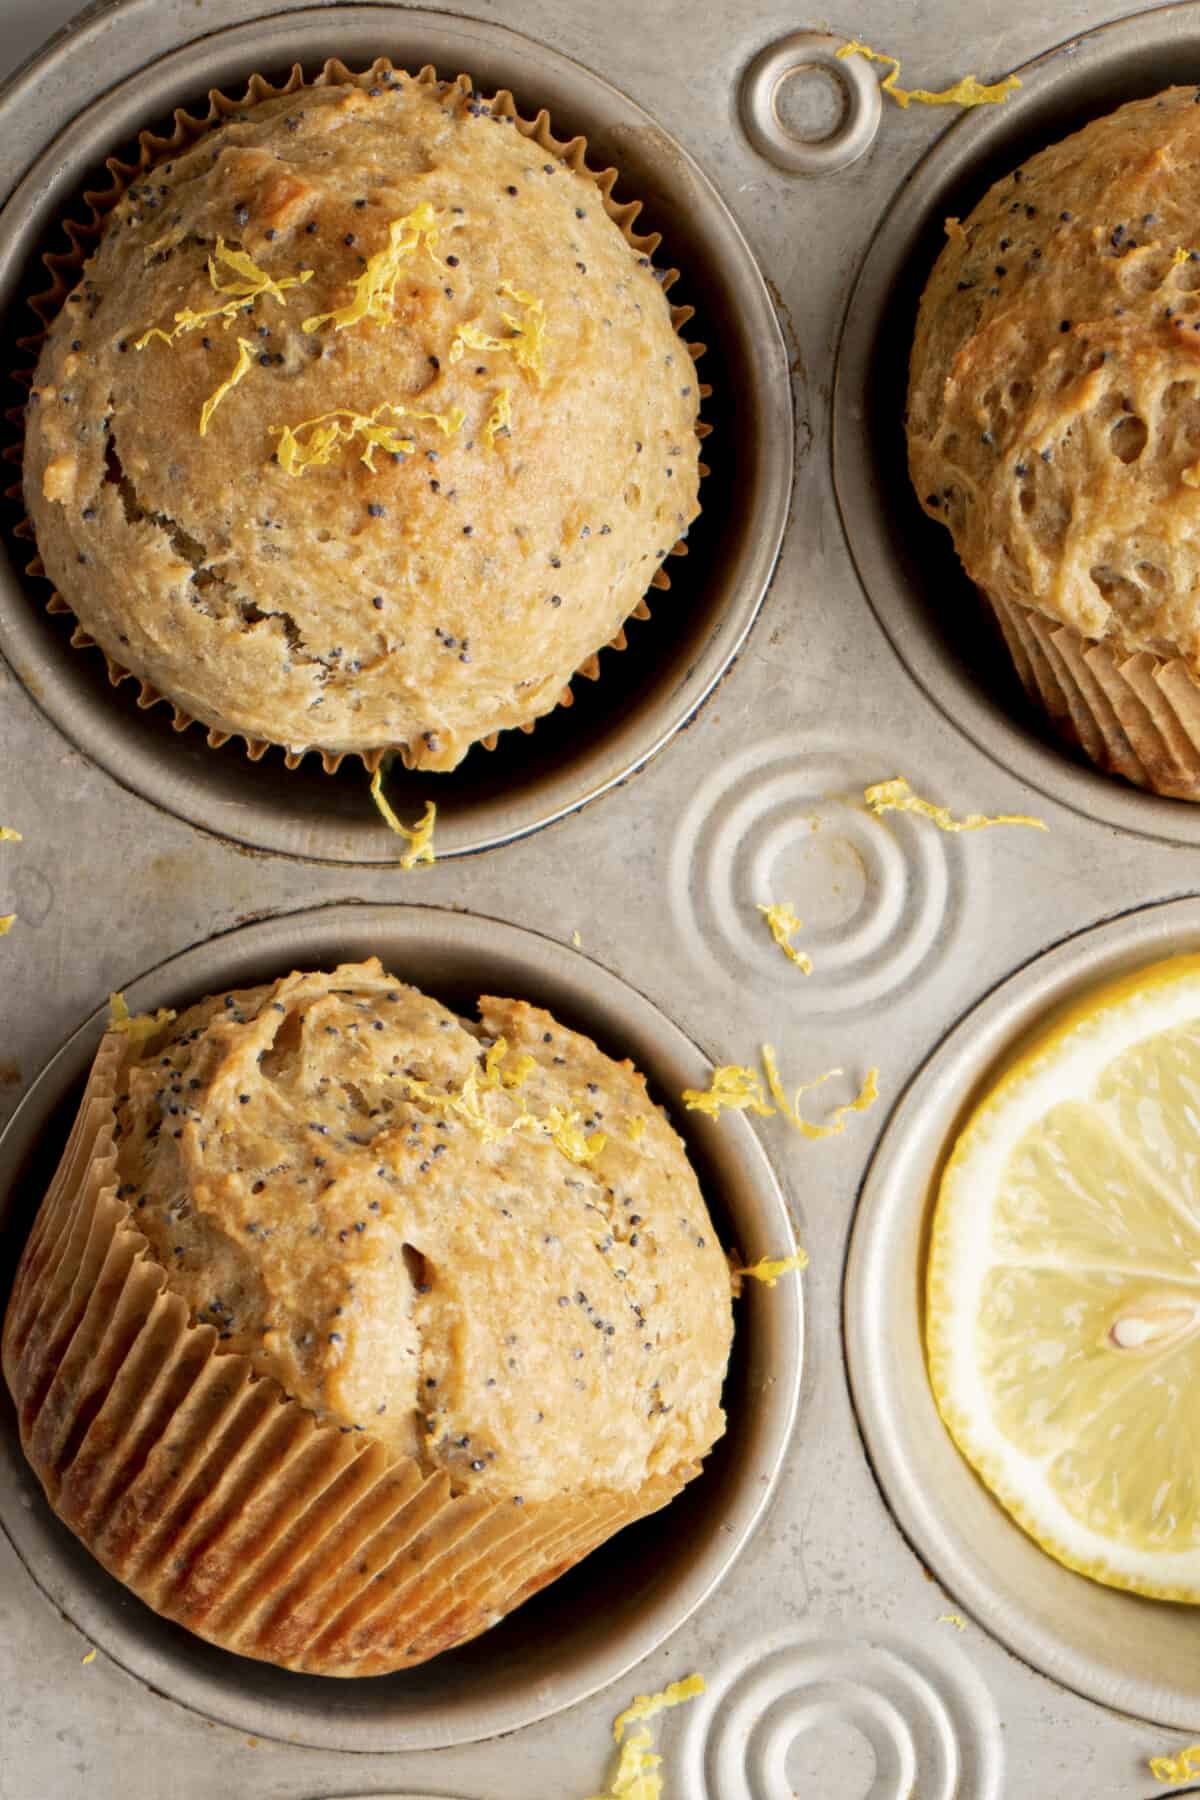 Lemon zest on muffins and a muffin tin.